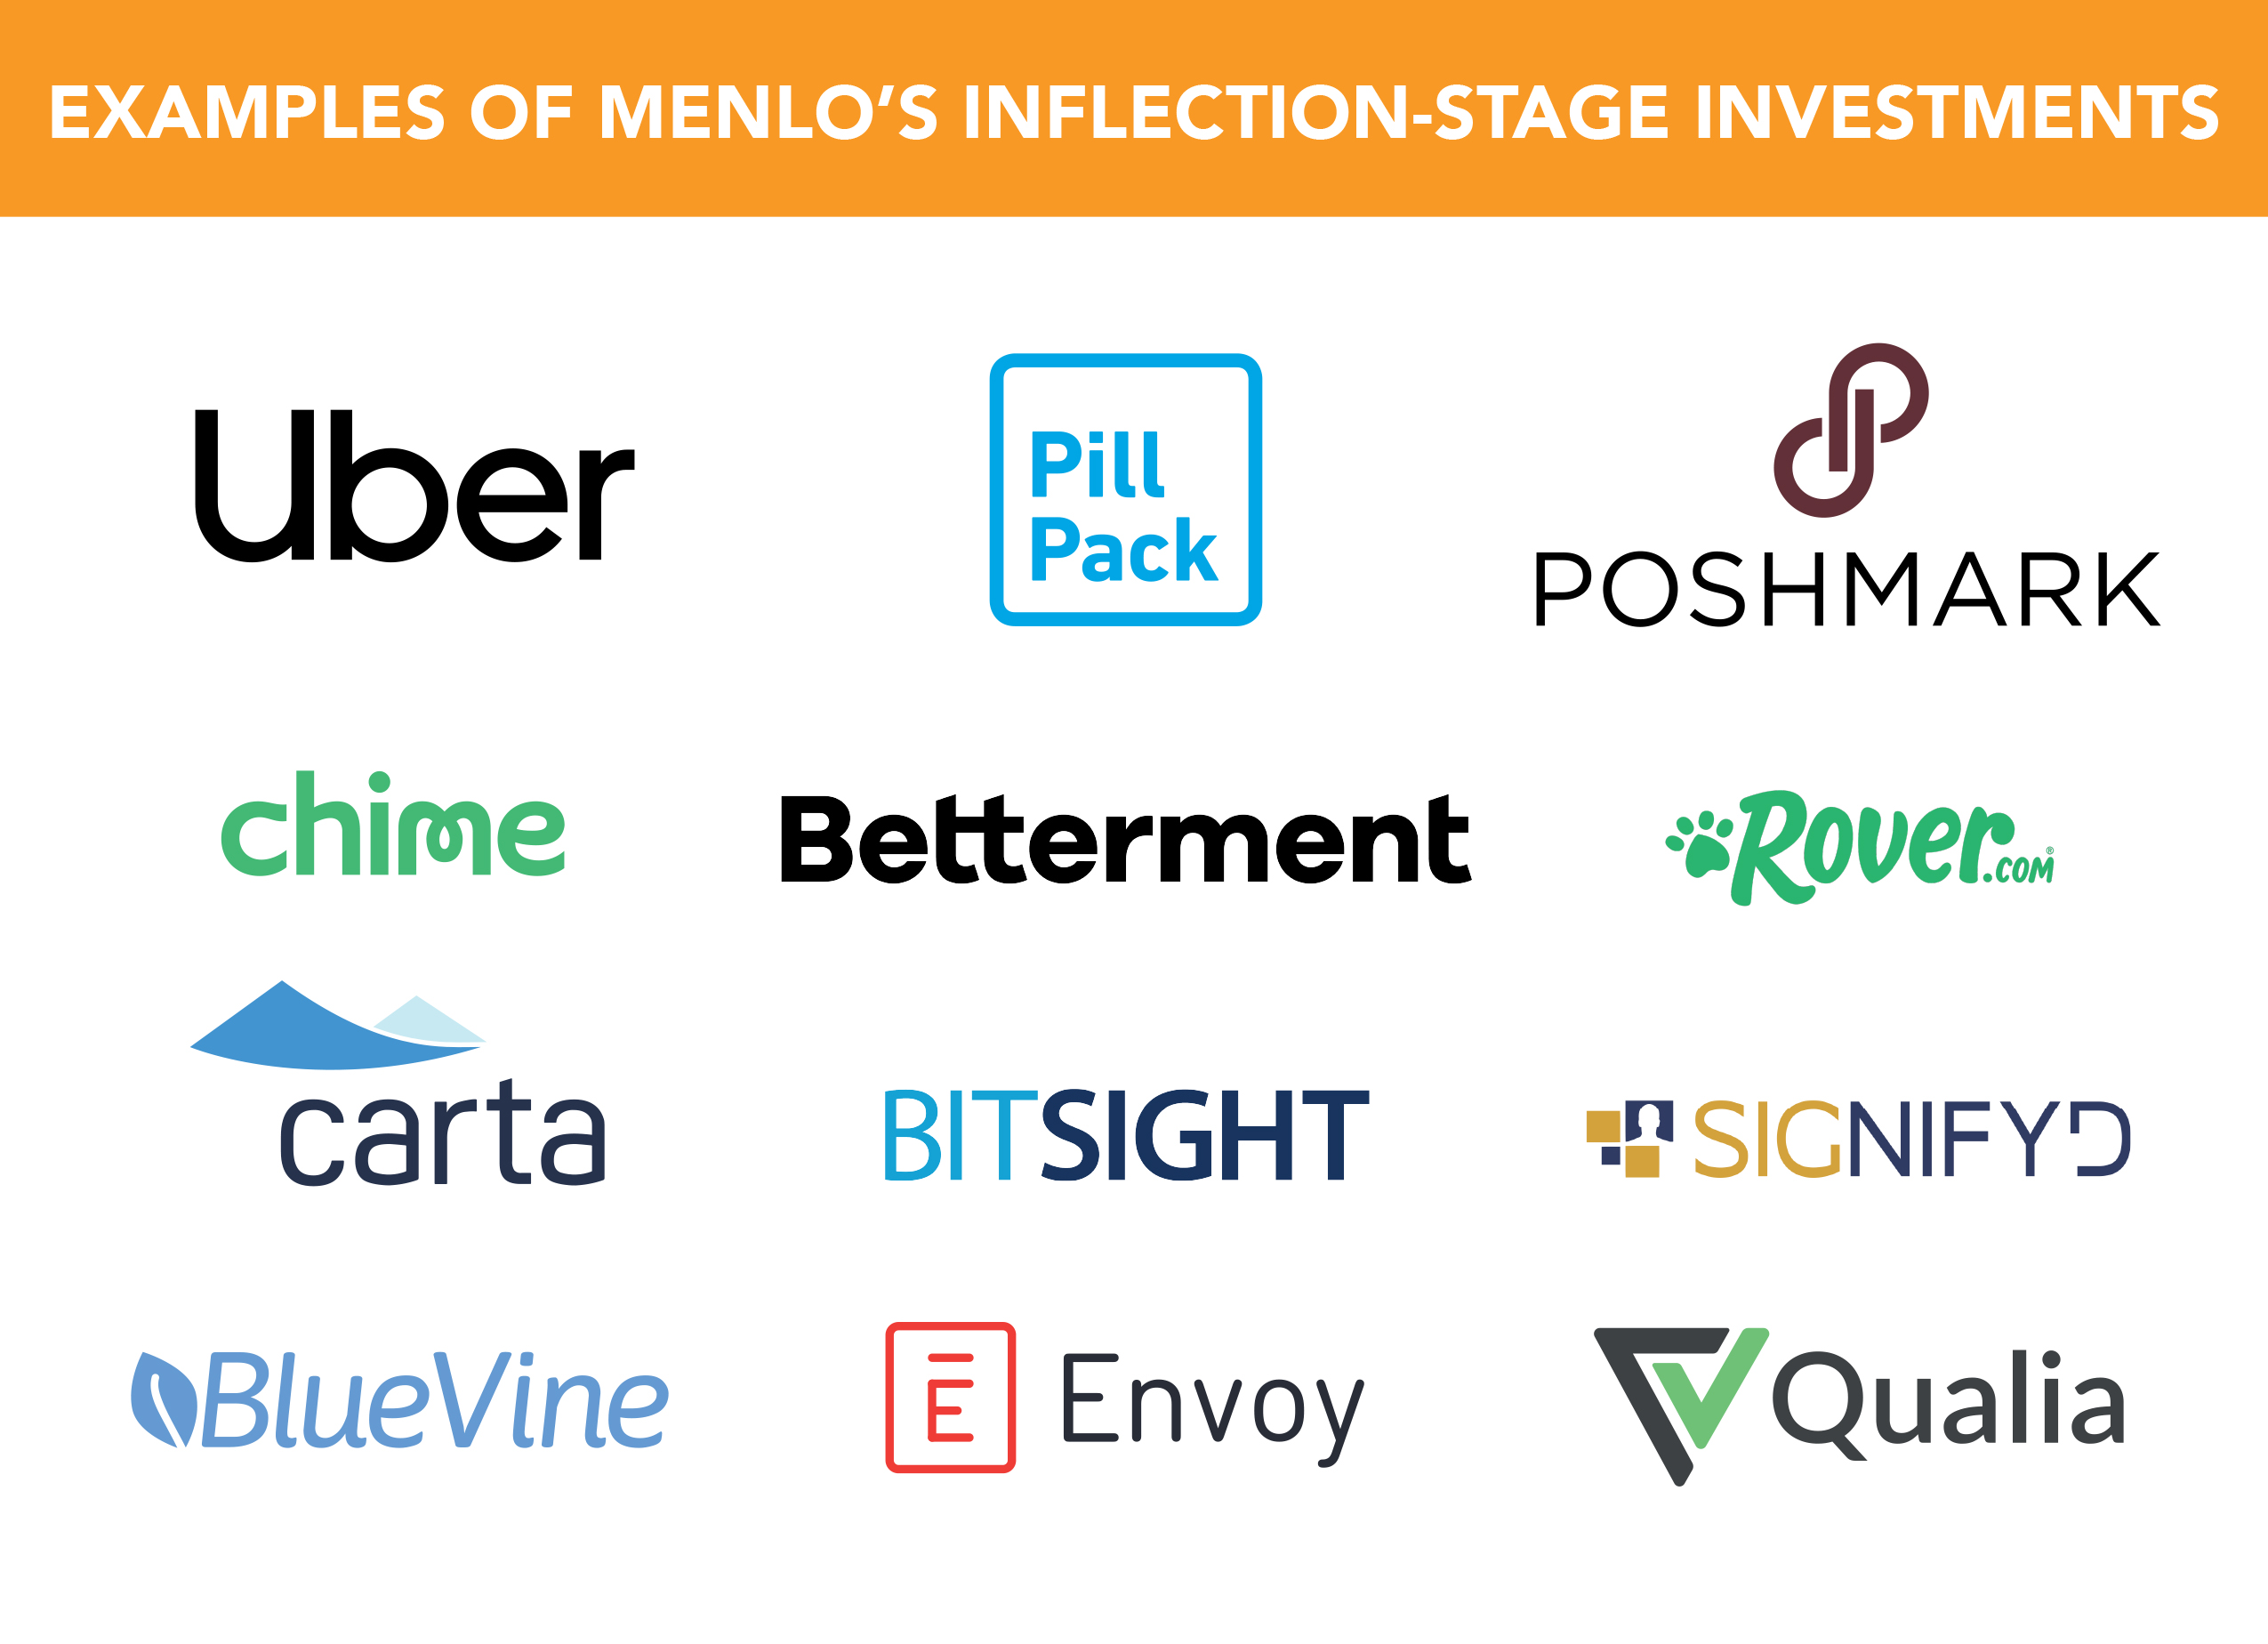 Examples of Menlo's Inflection-Stage Investments